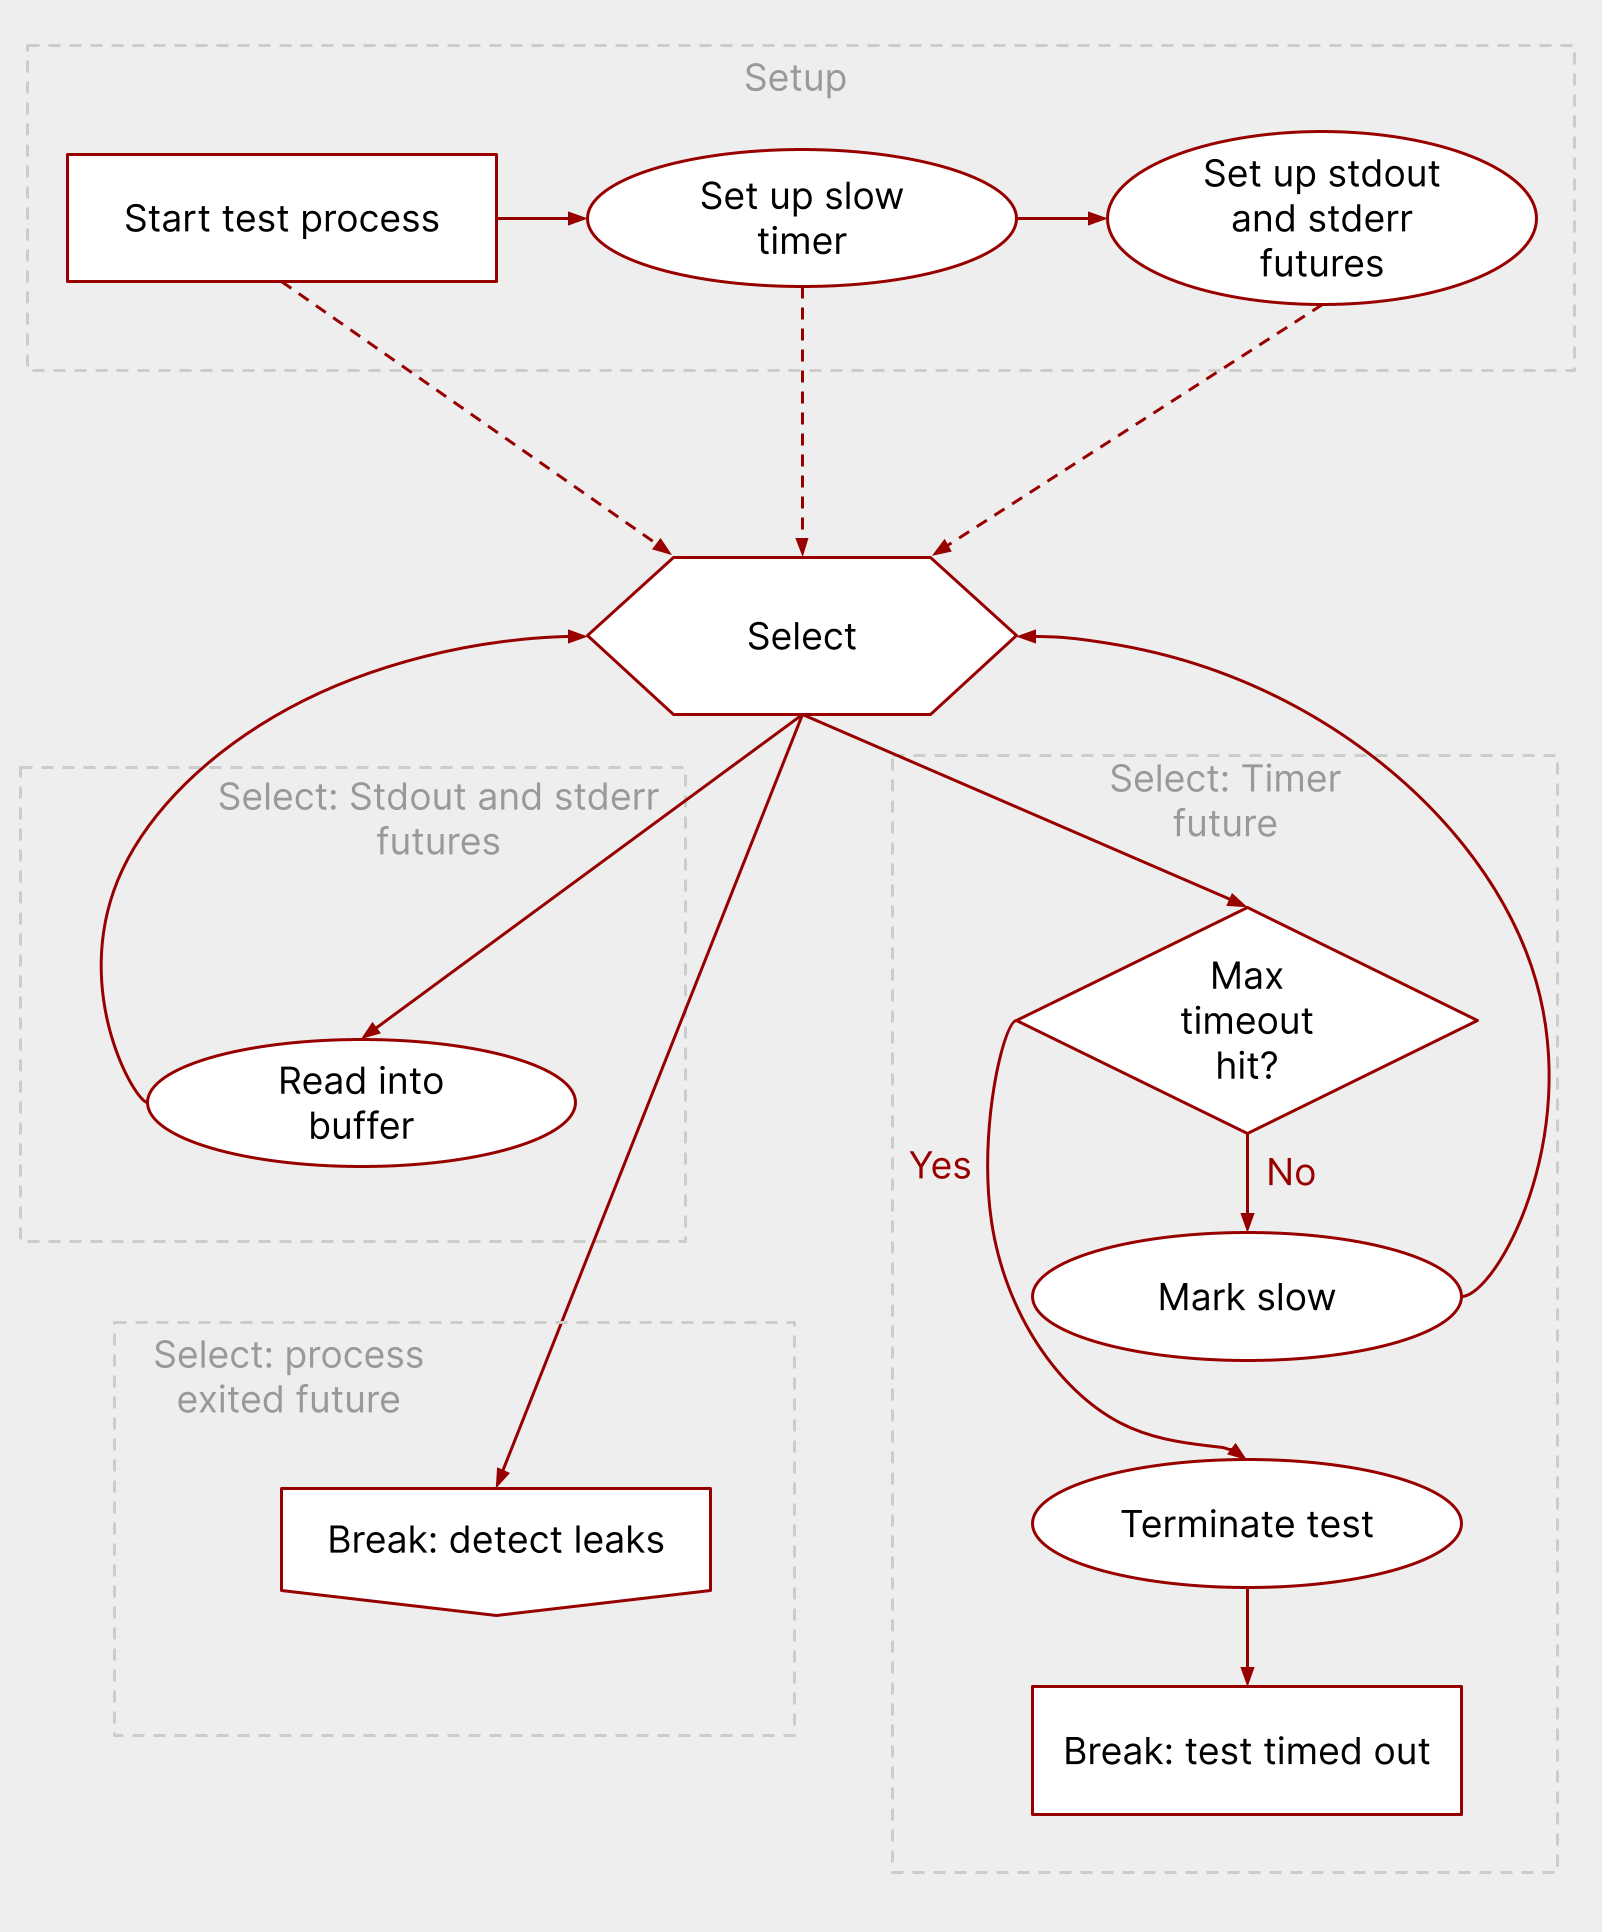 A flowchart to show how nextest's Tokio-based runner loop executes tests. See below for text description.